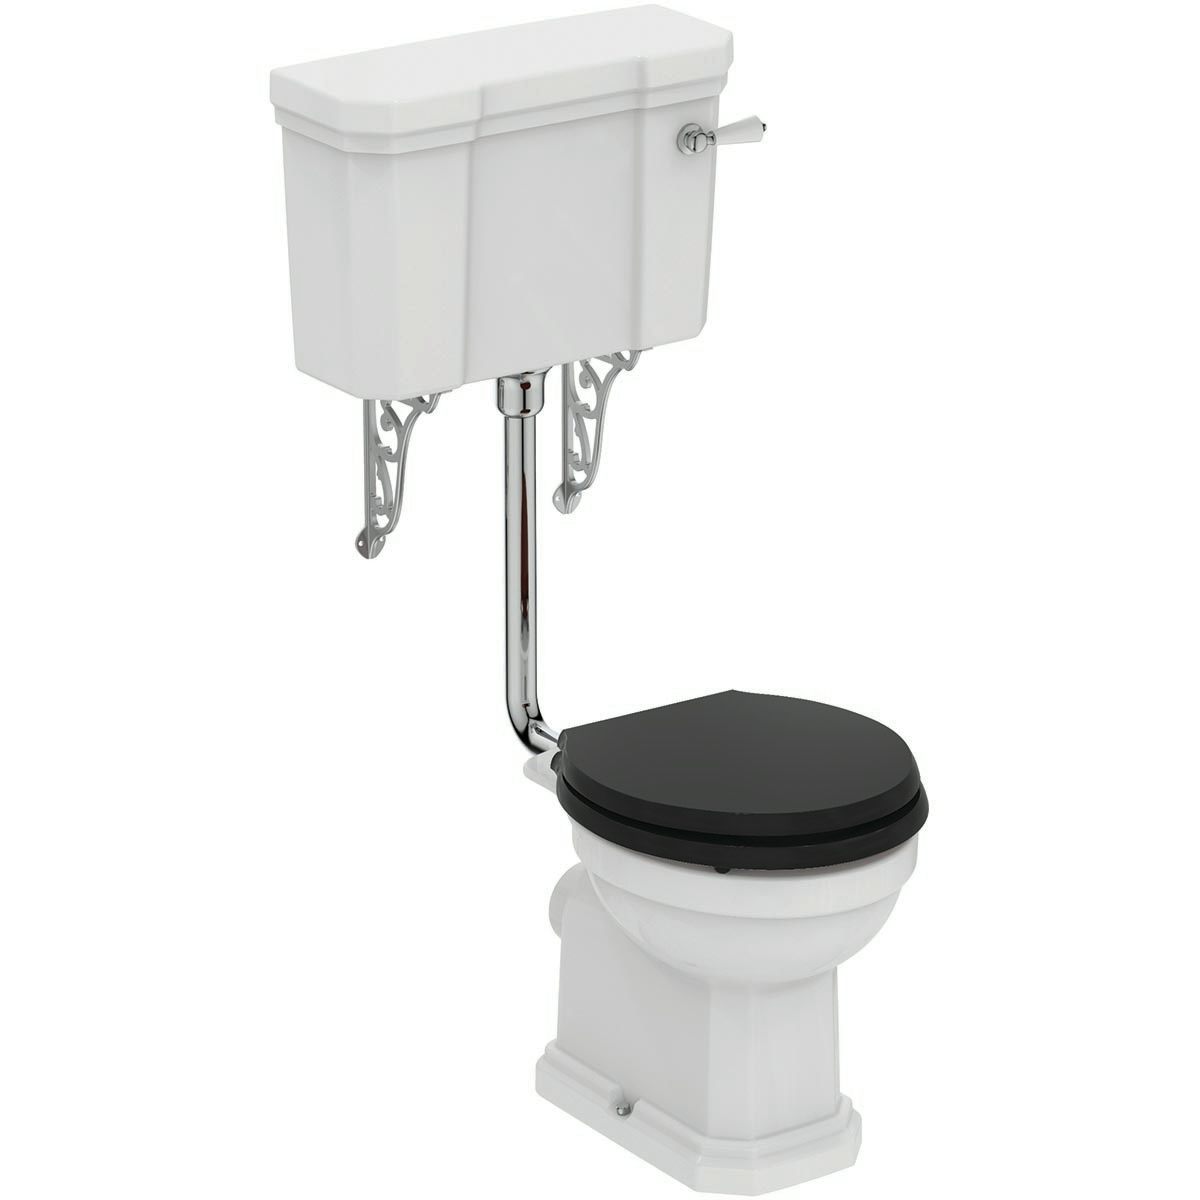 Ideal Standard Waverley low level toilet with ornate brackets and black toilet seat